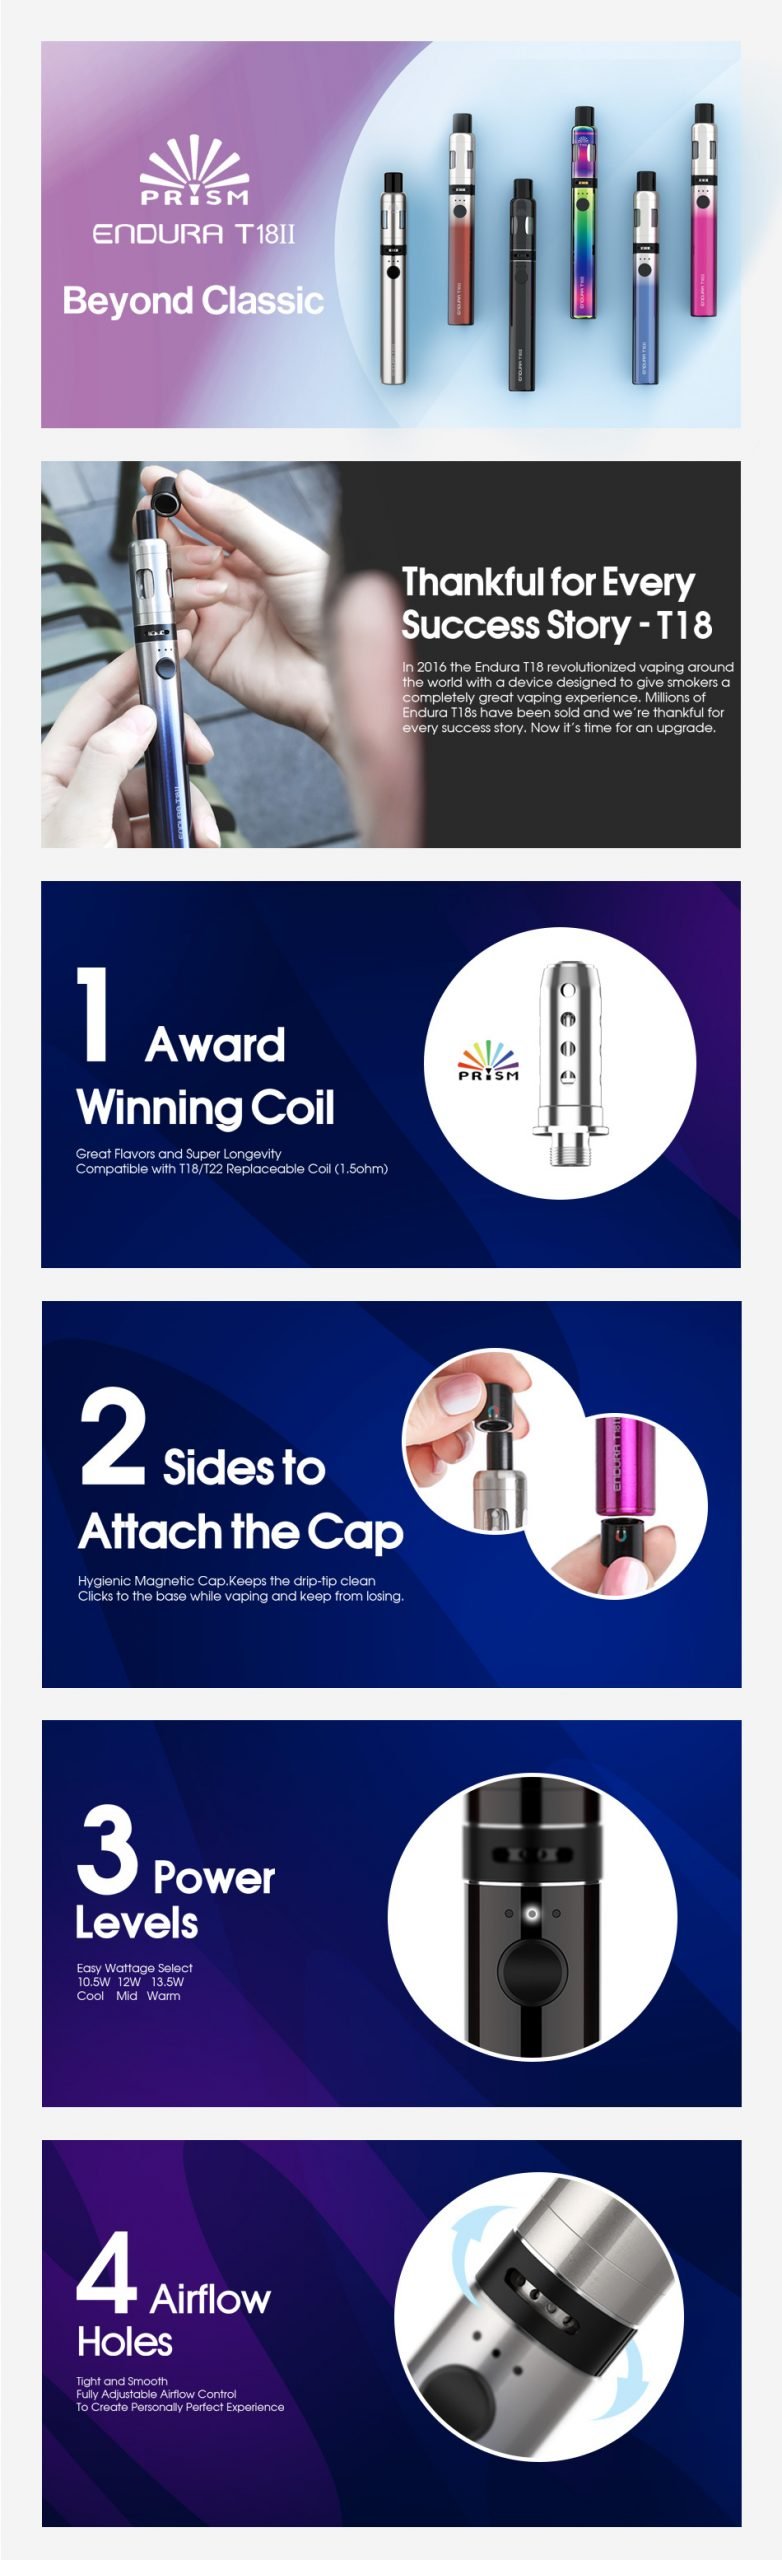 Innokin Endura T18 II - Promotional image highlighting the device's features. Series of 6 text-heavy images.